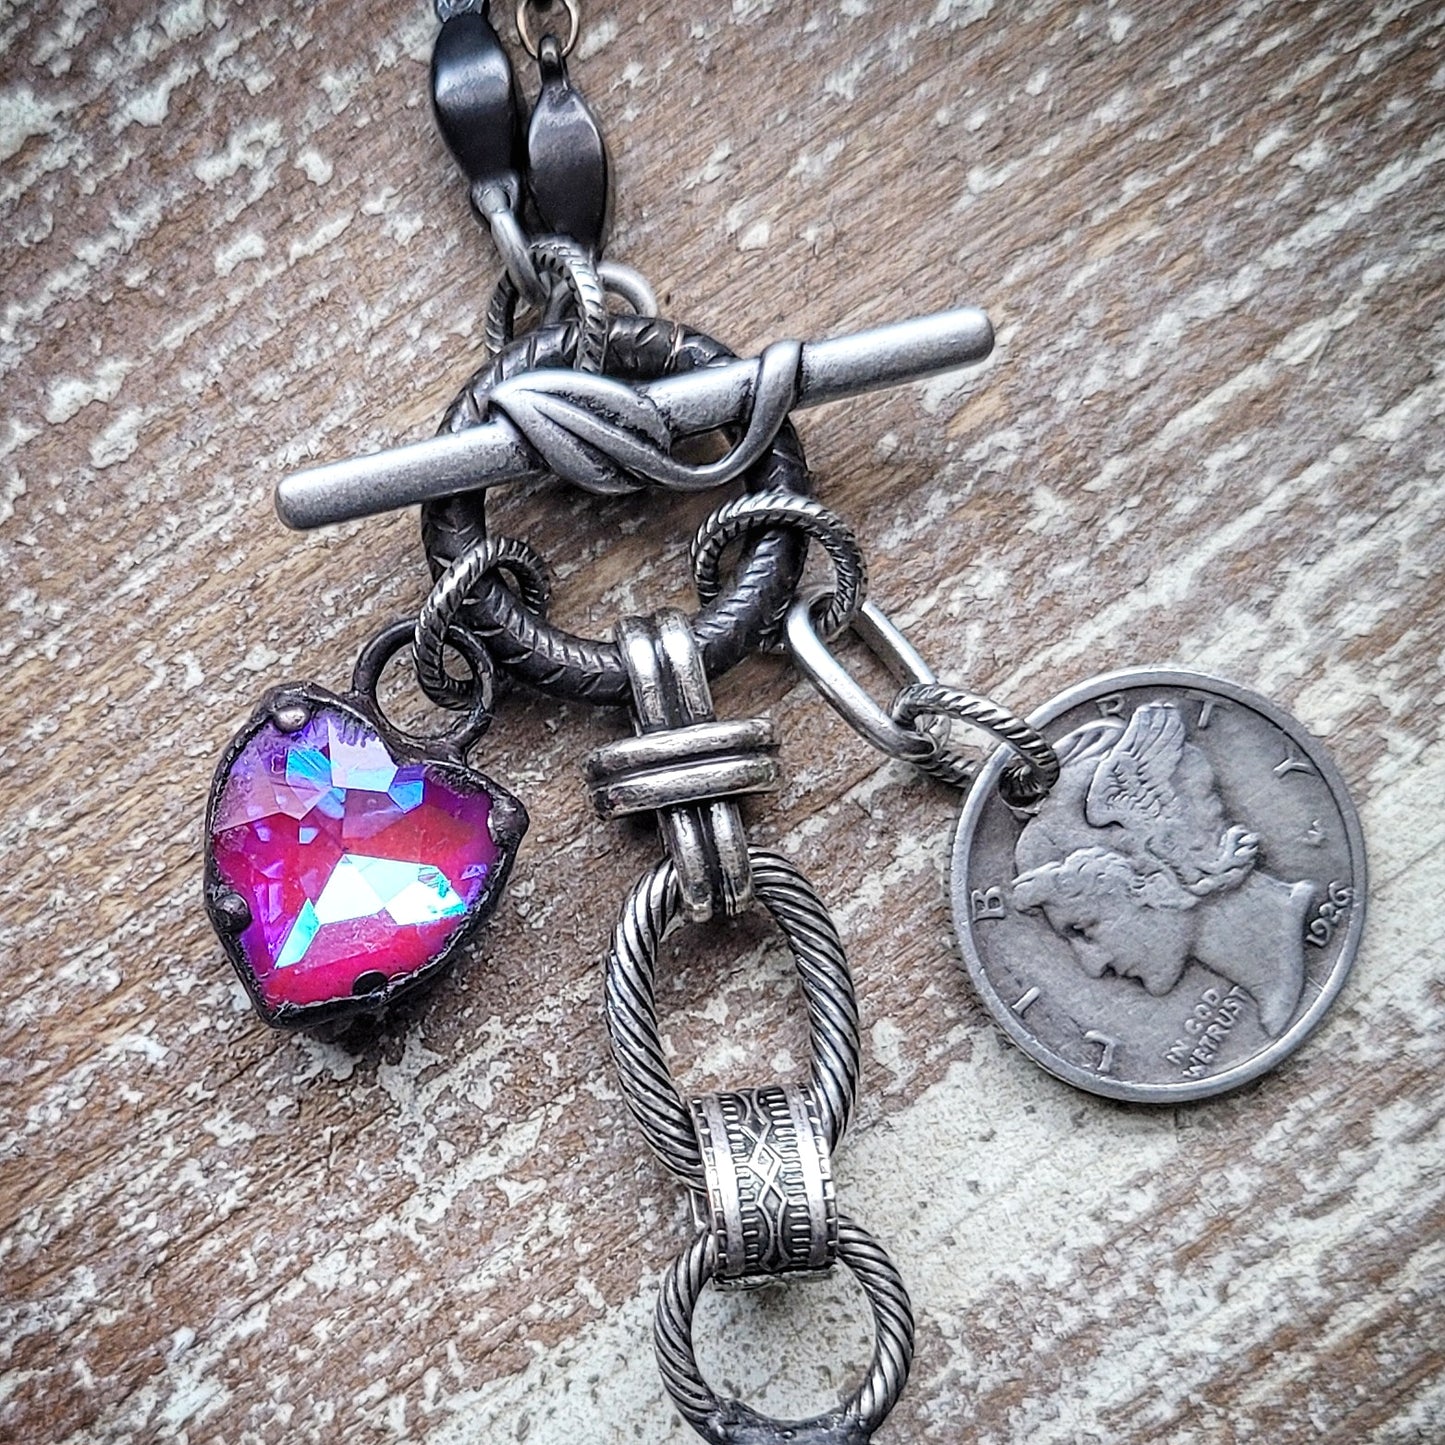 Rustic Liberty Cross necklace, vintage Mercury Dime, soldered pink heart charm rustic Boho necklace